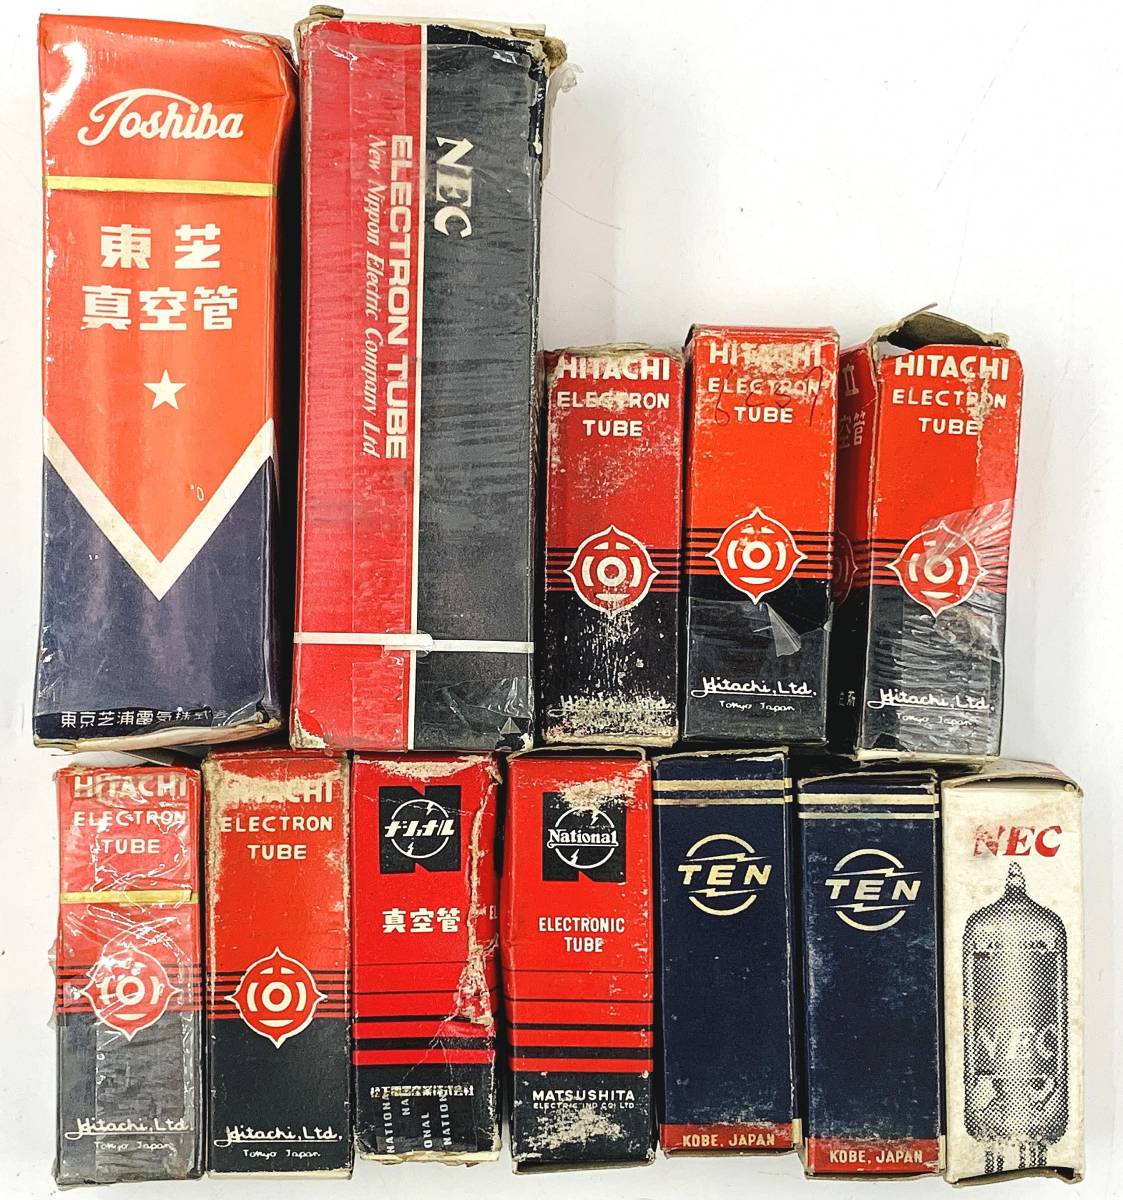  vacuum tube 13 point together image first left on Toshiba 1 point only unopened NEC Japan electric HITACHI Hitachi NATIONAL National junk treatment 